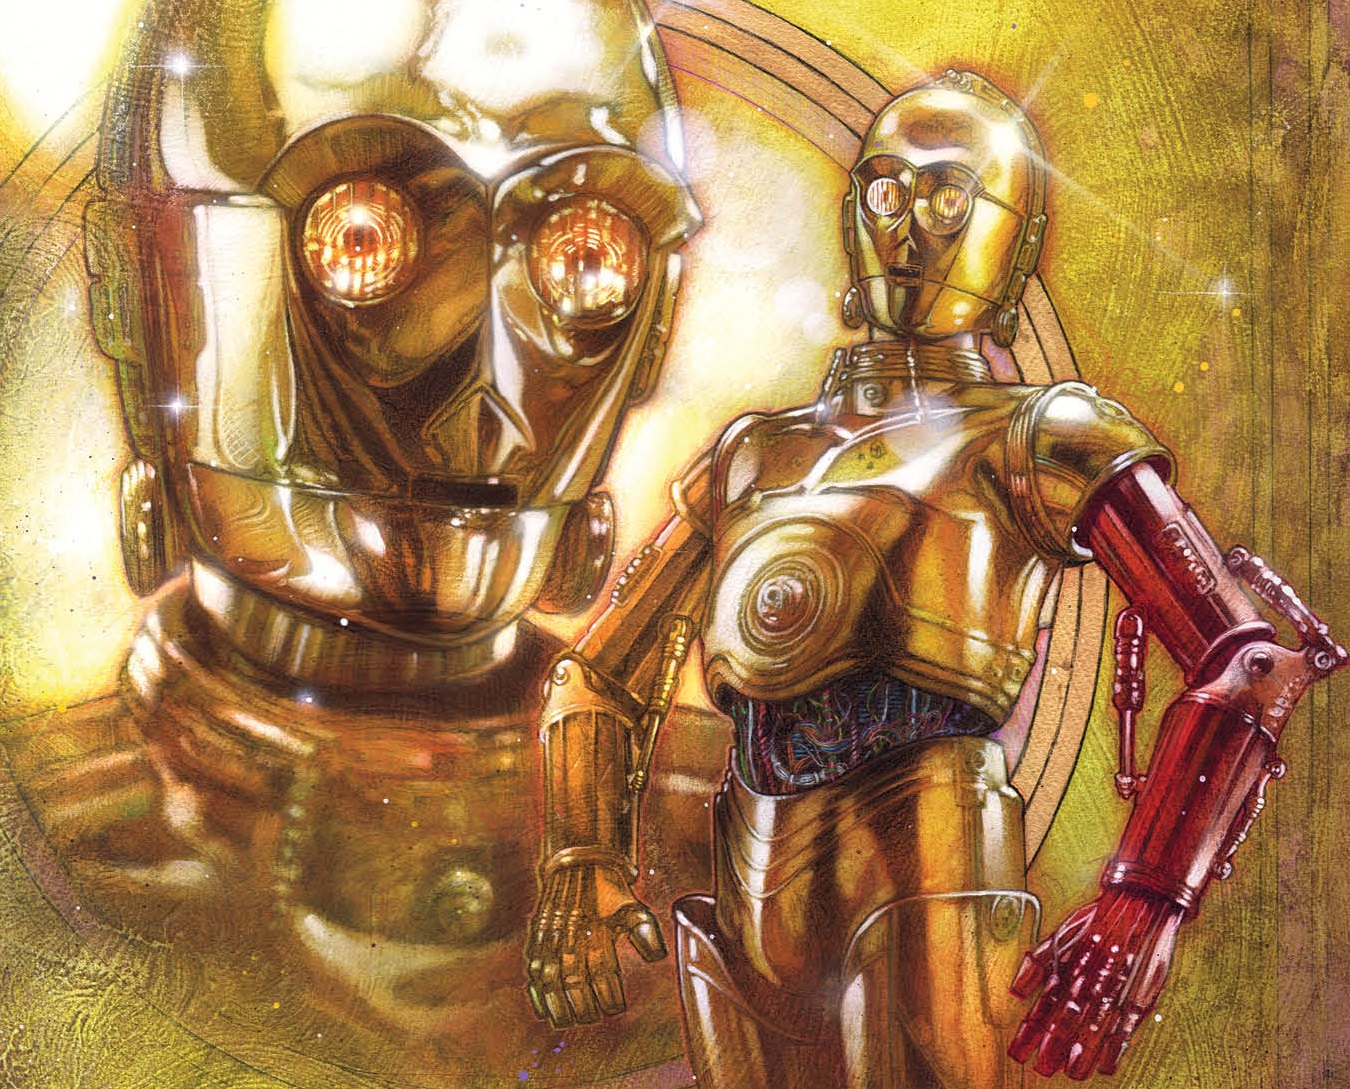 Star Wars: The Force Awakens - How Did C-3PO Get That Red Arm?